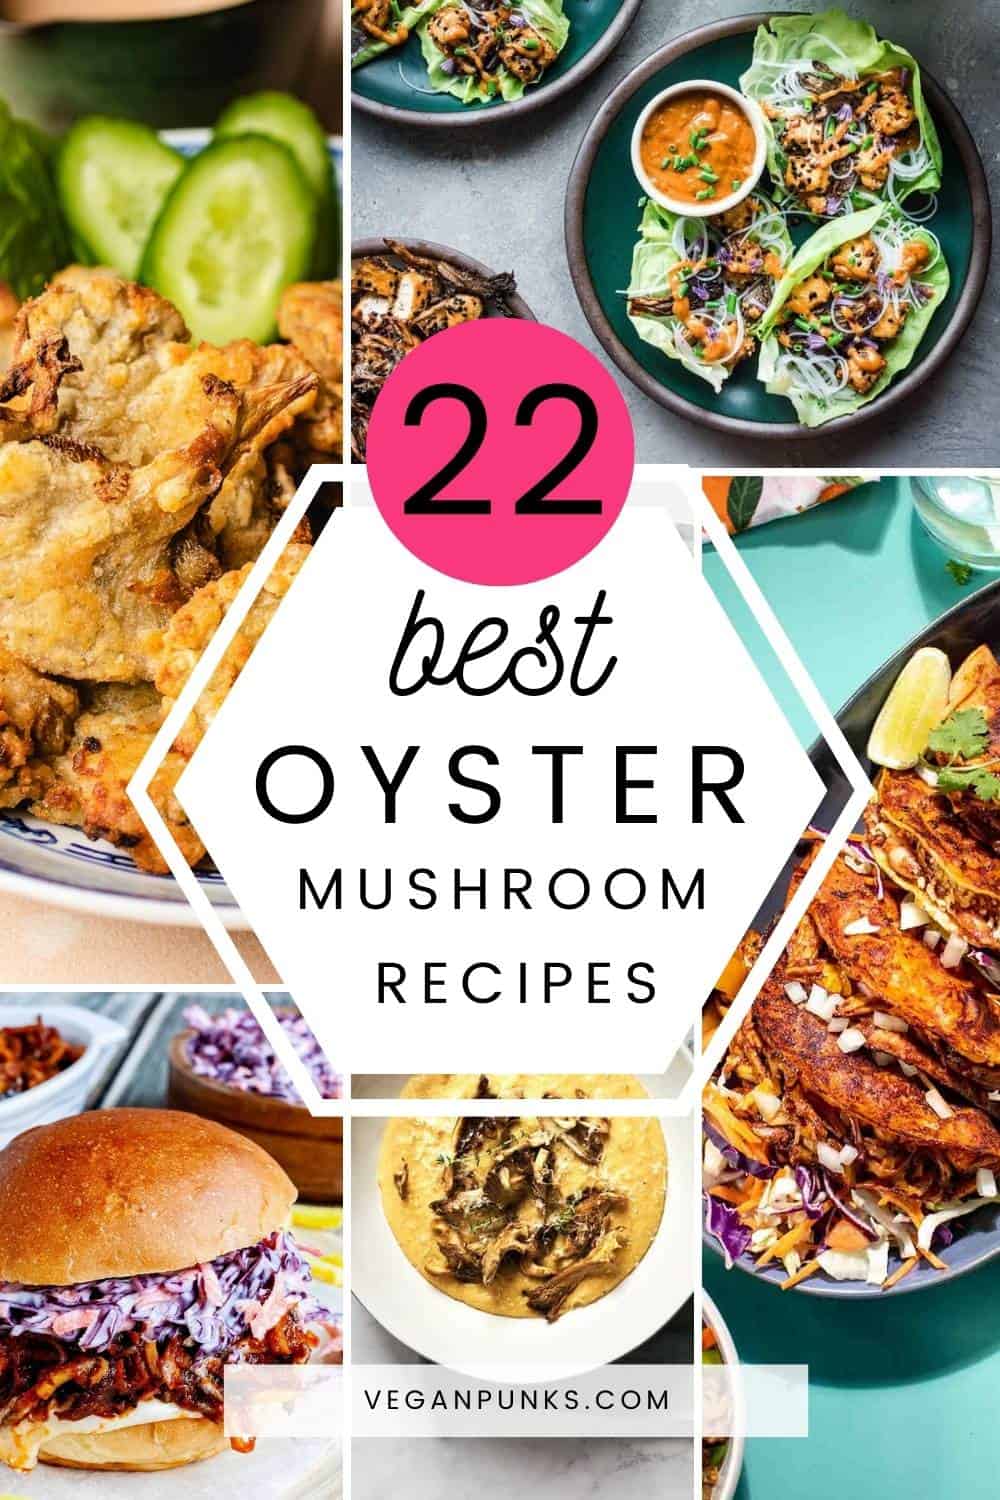 Collage of oyster mushroom recipes with a title in the middle.